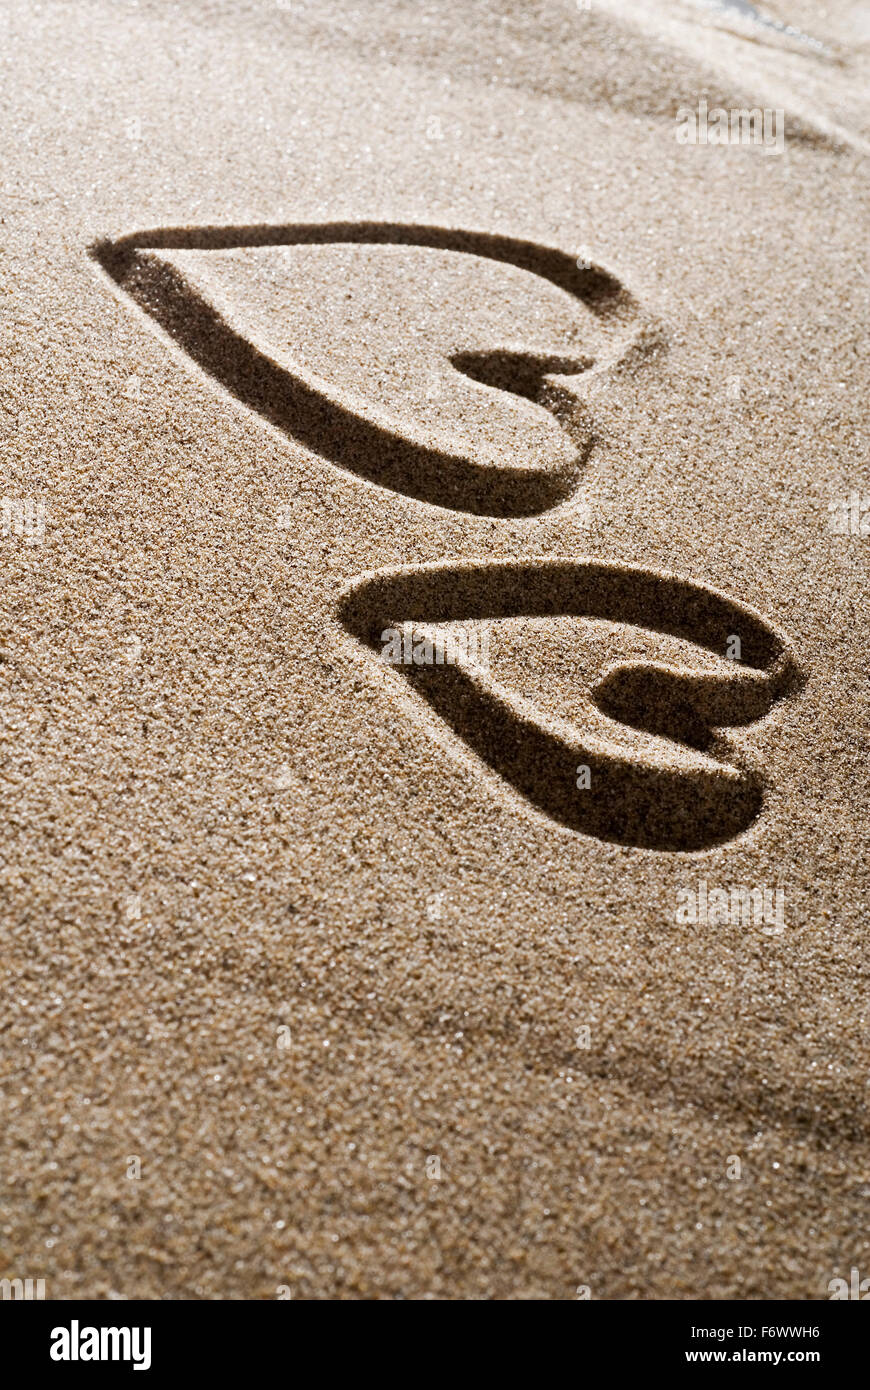 A heart painted in the sand Stock Photo